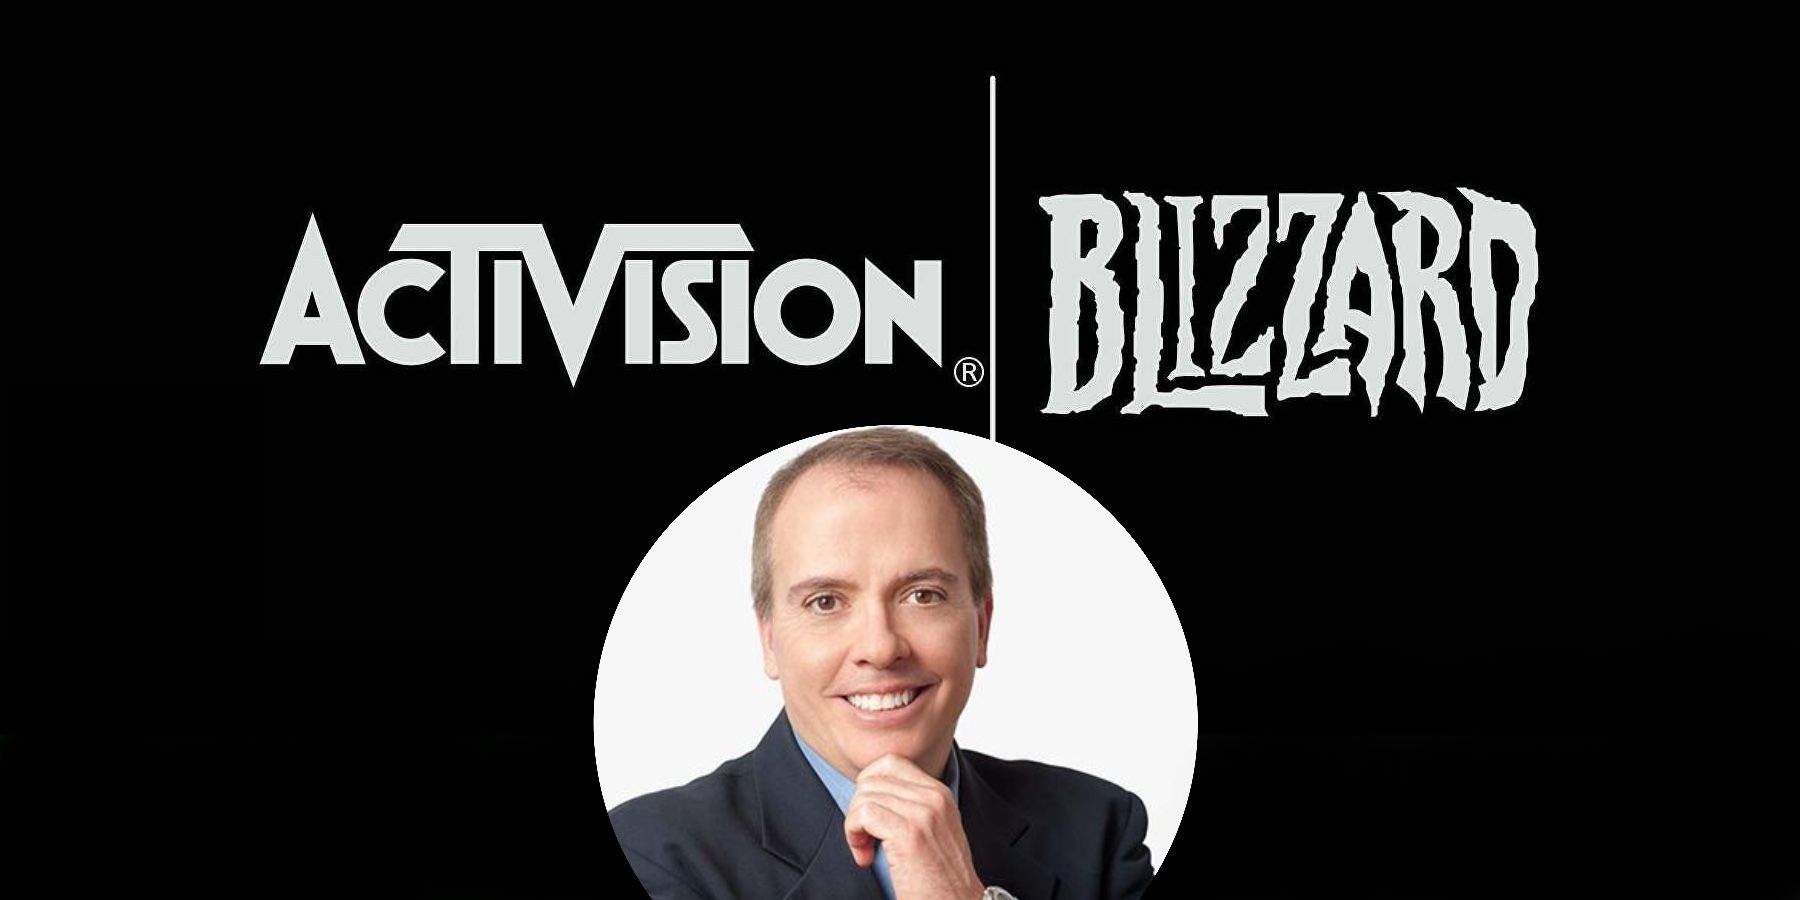 Activision Blizzard outgoing Chief Operating Officer and President Daniel Alegre